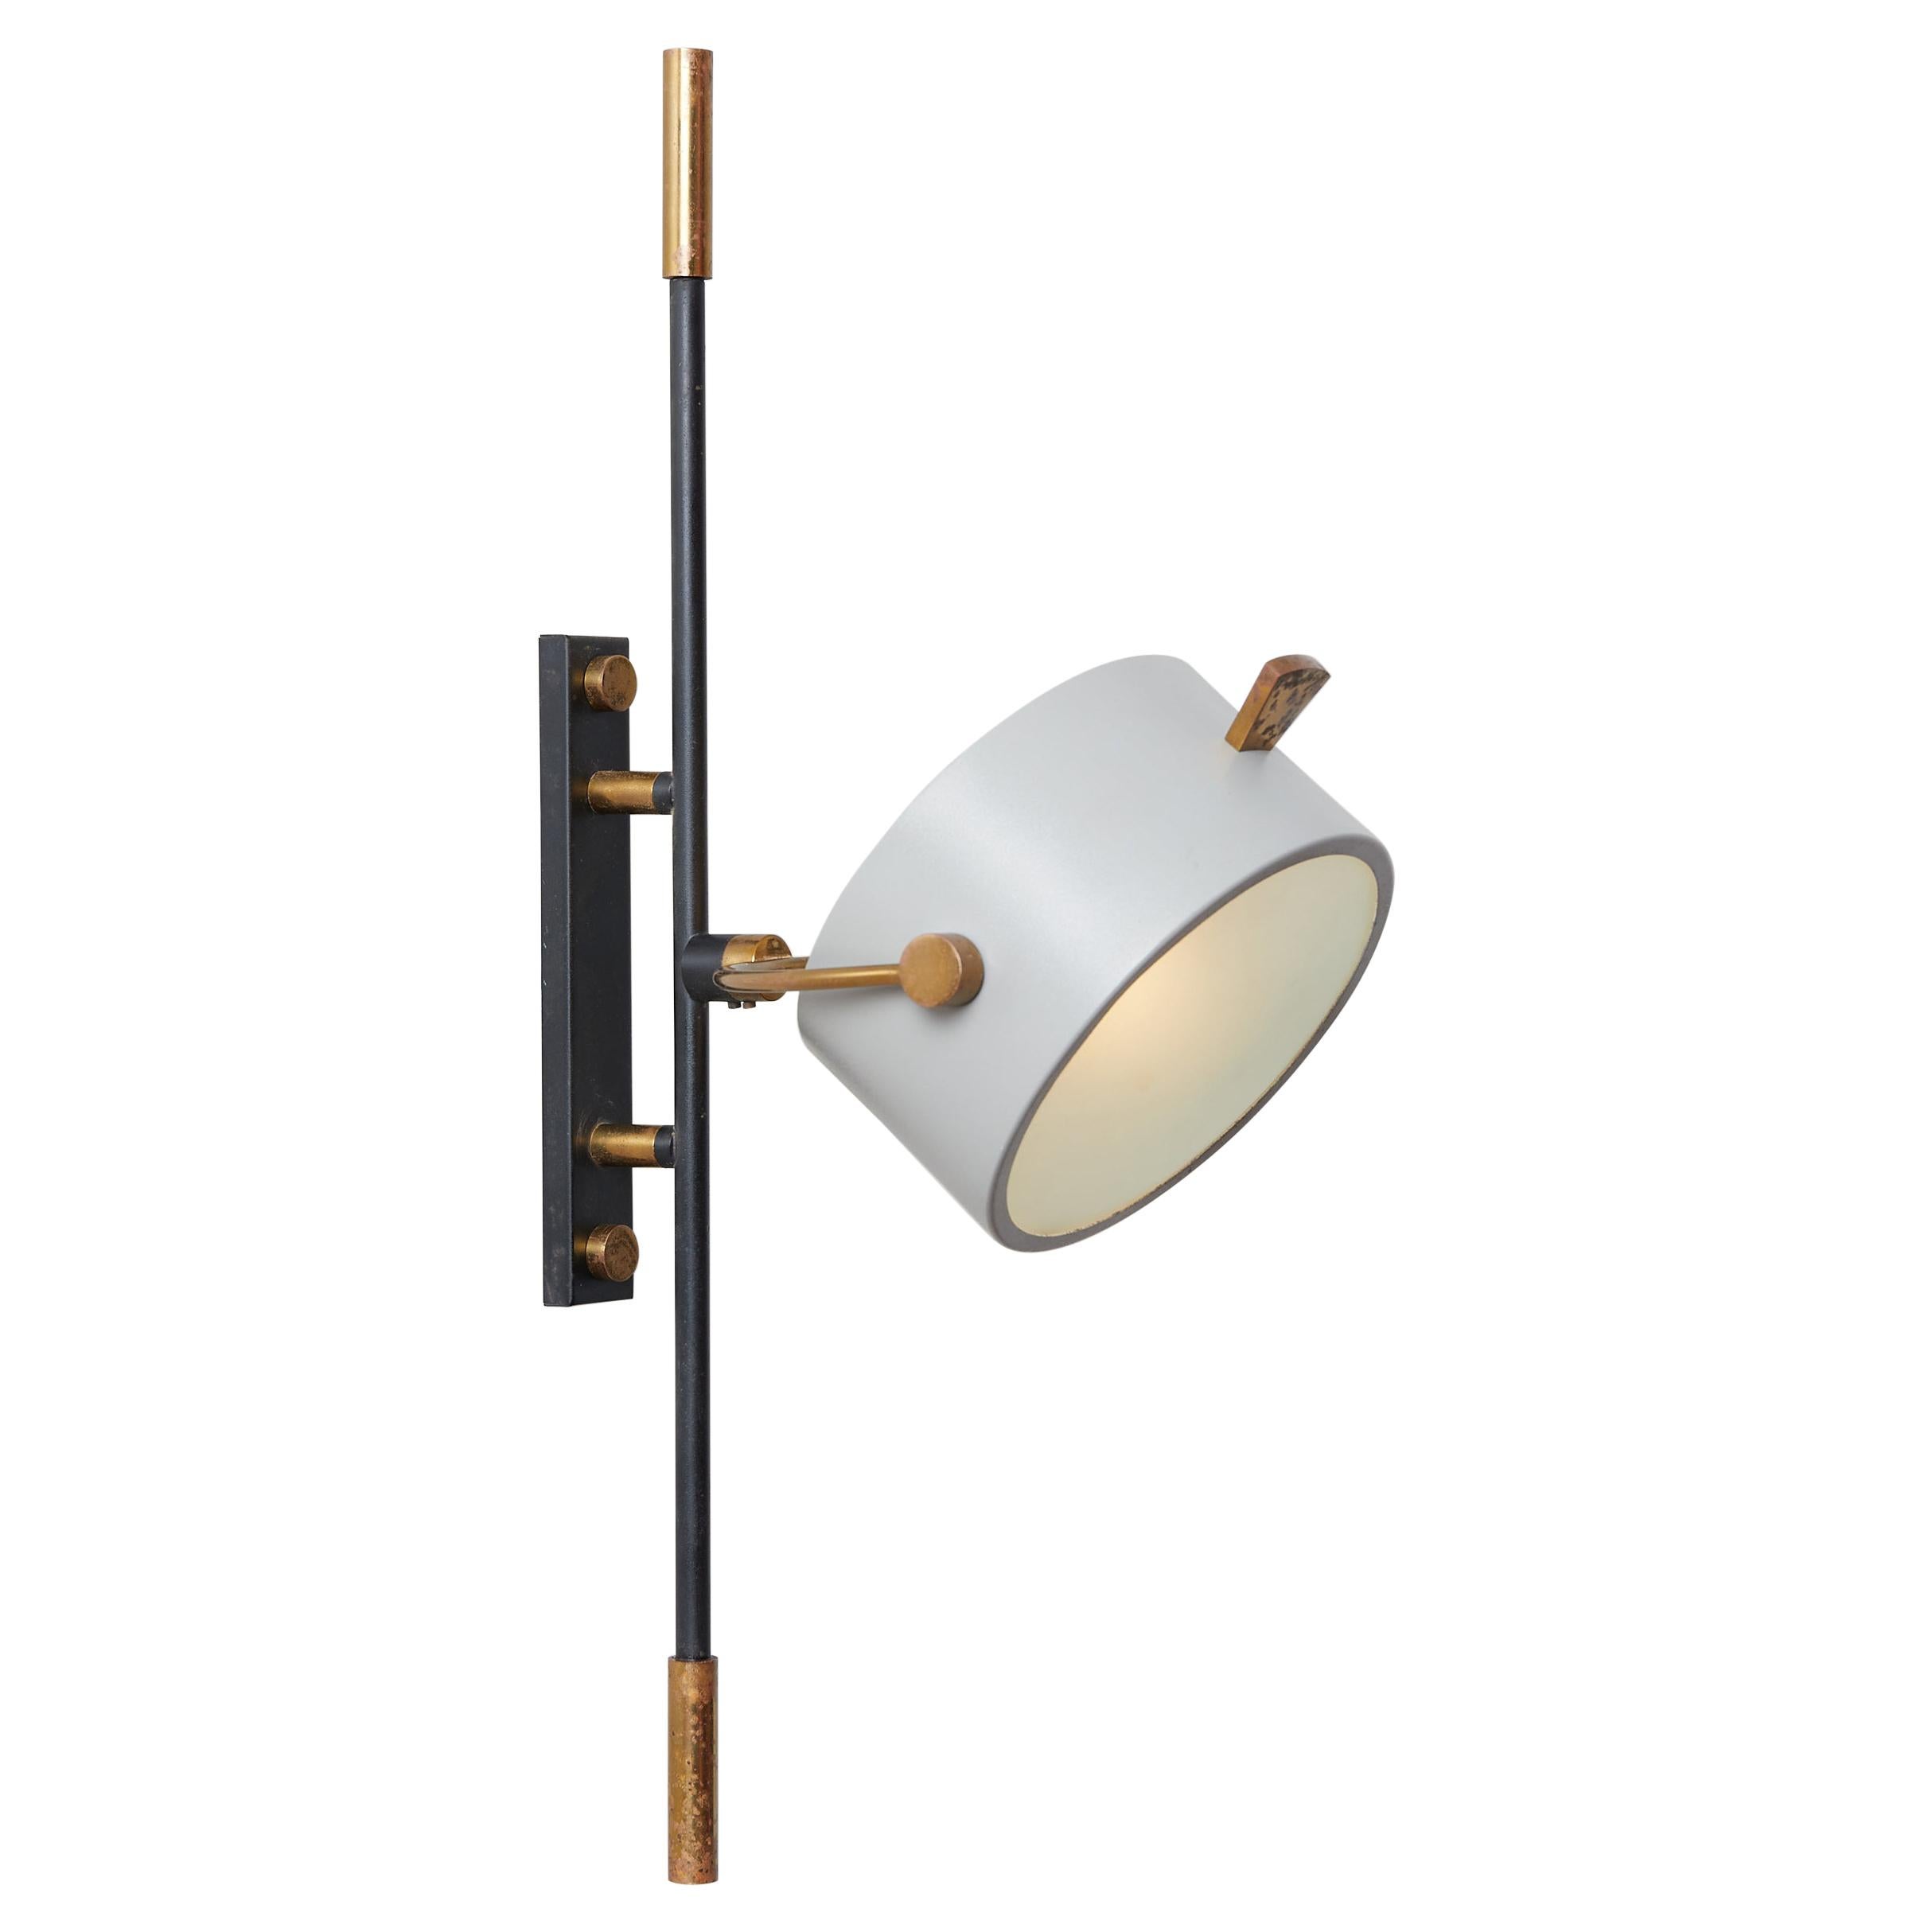 Wall Sconce with Lens Shaped Reflector by Maison Lunel, France, 1950